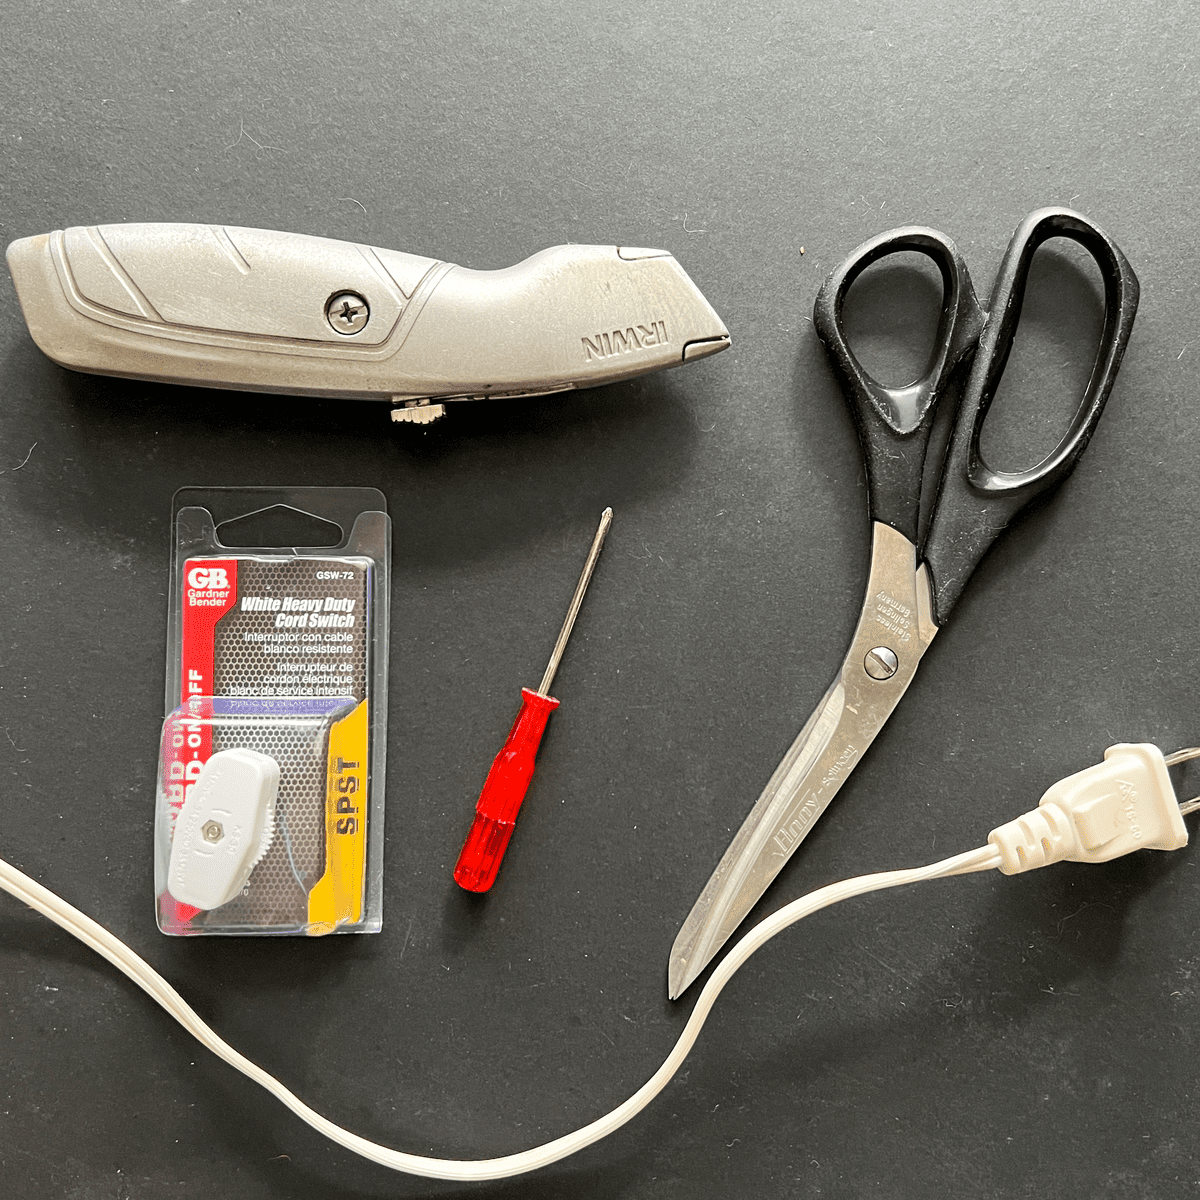 Box cutter, black handled pair of scissors, cord with plug, mini screwdriver and light switch.